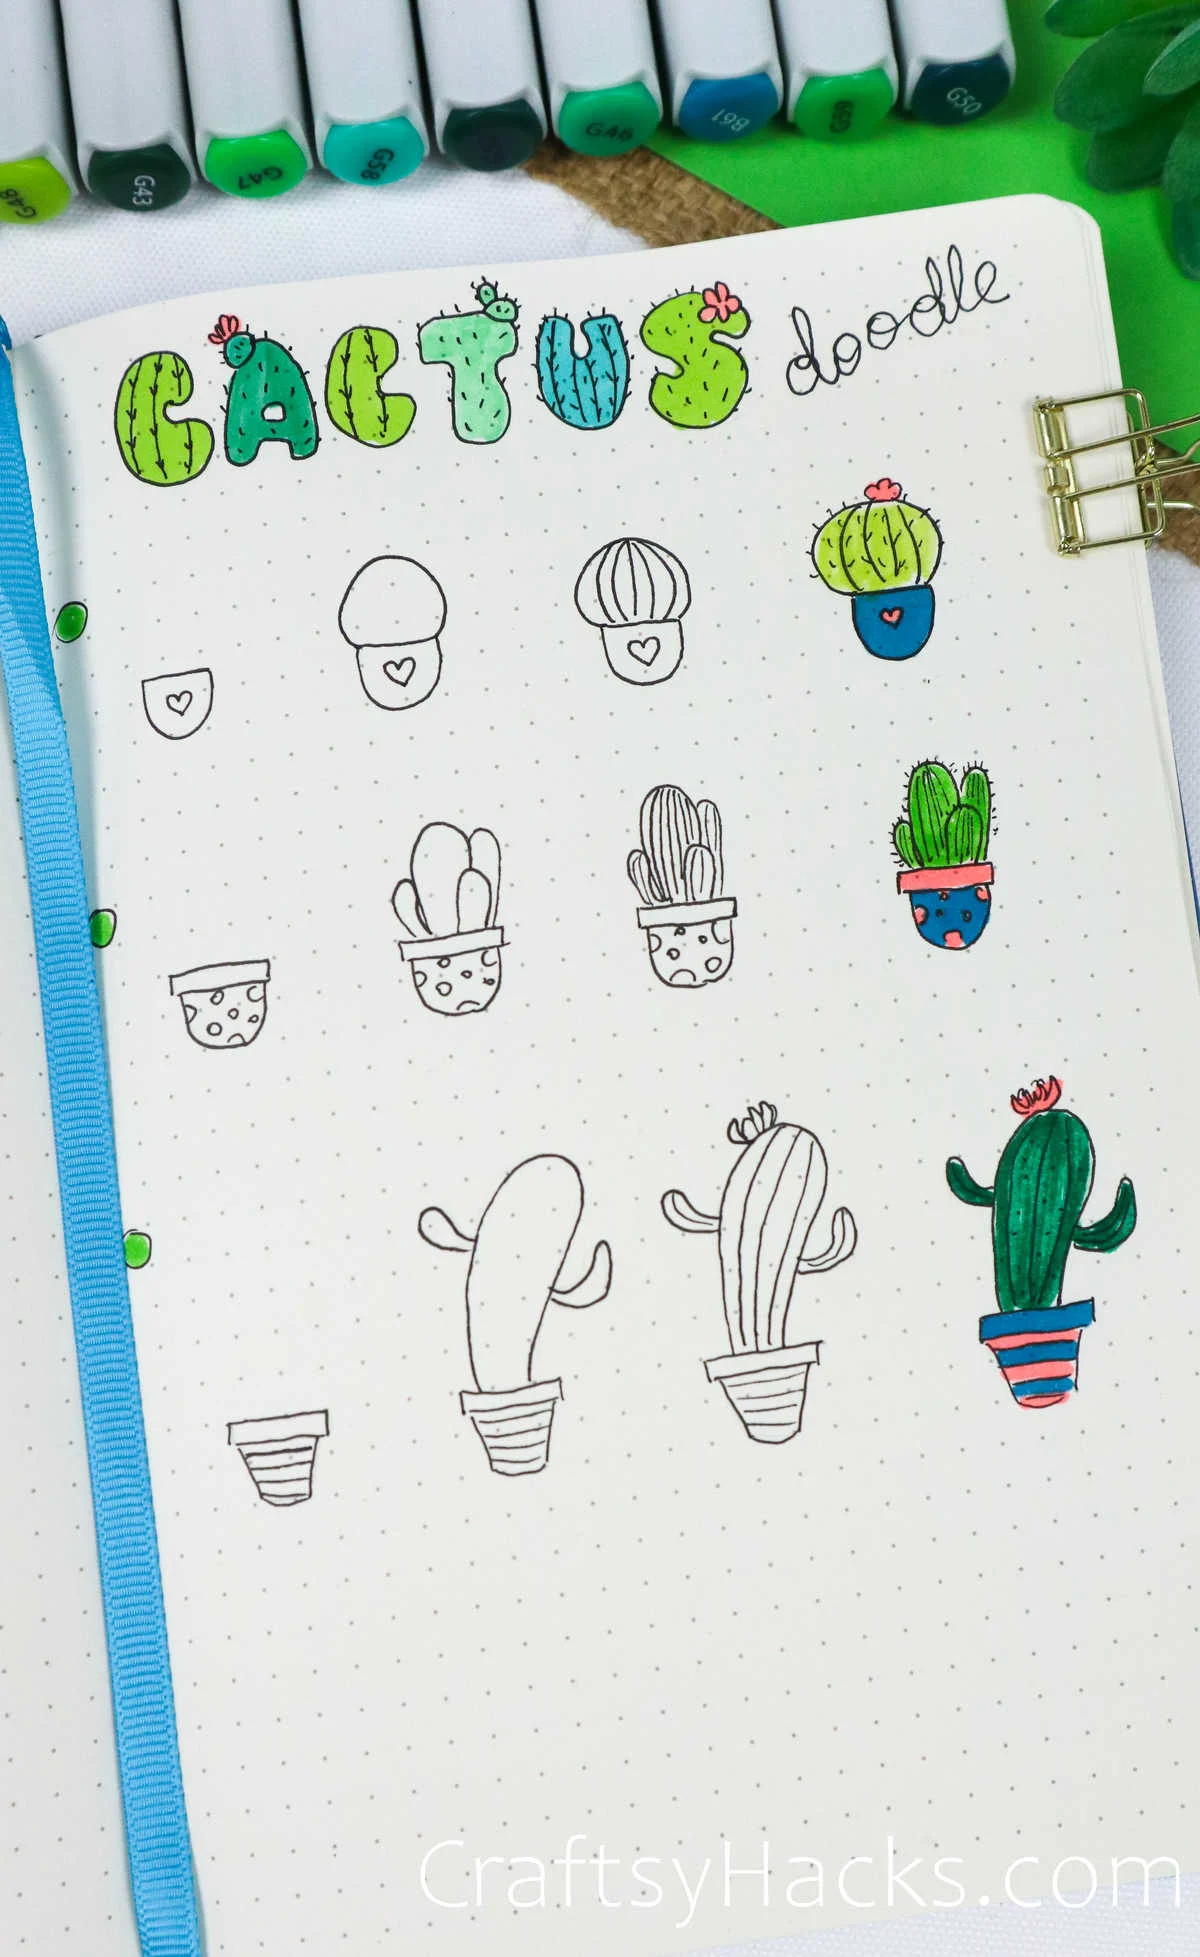 cactus doodle drawing ideas